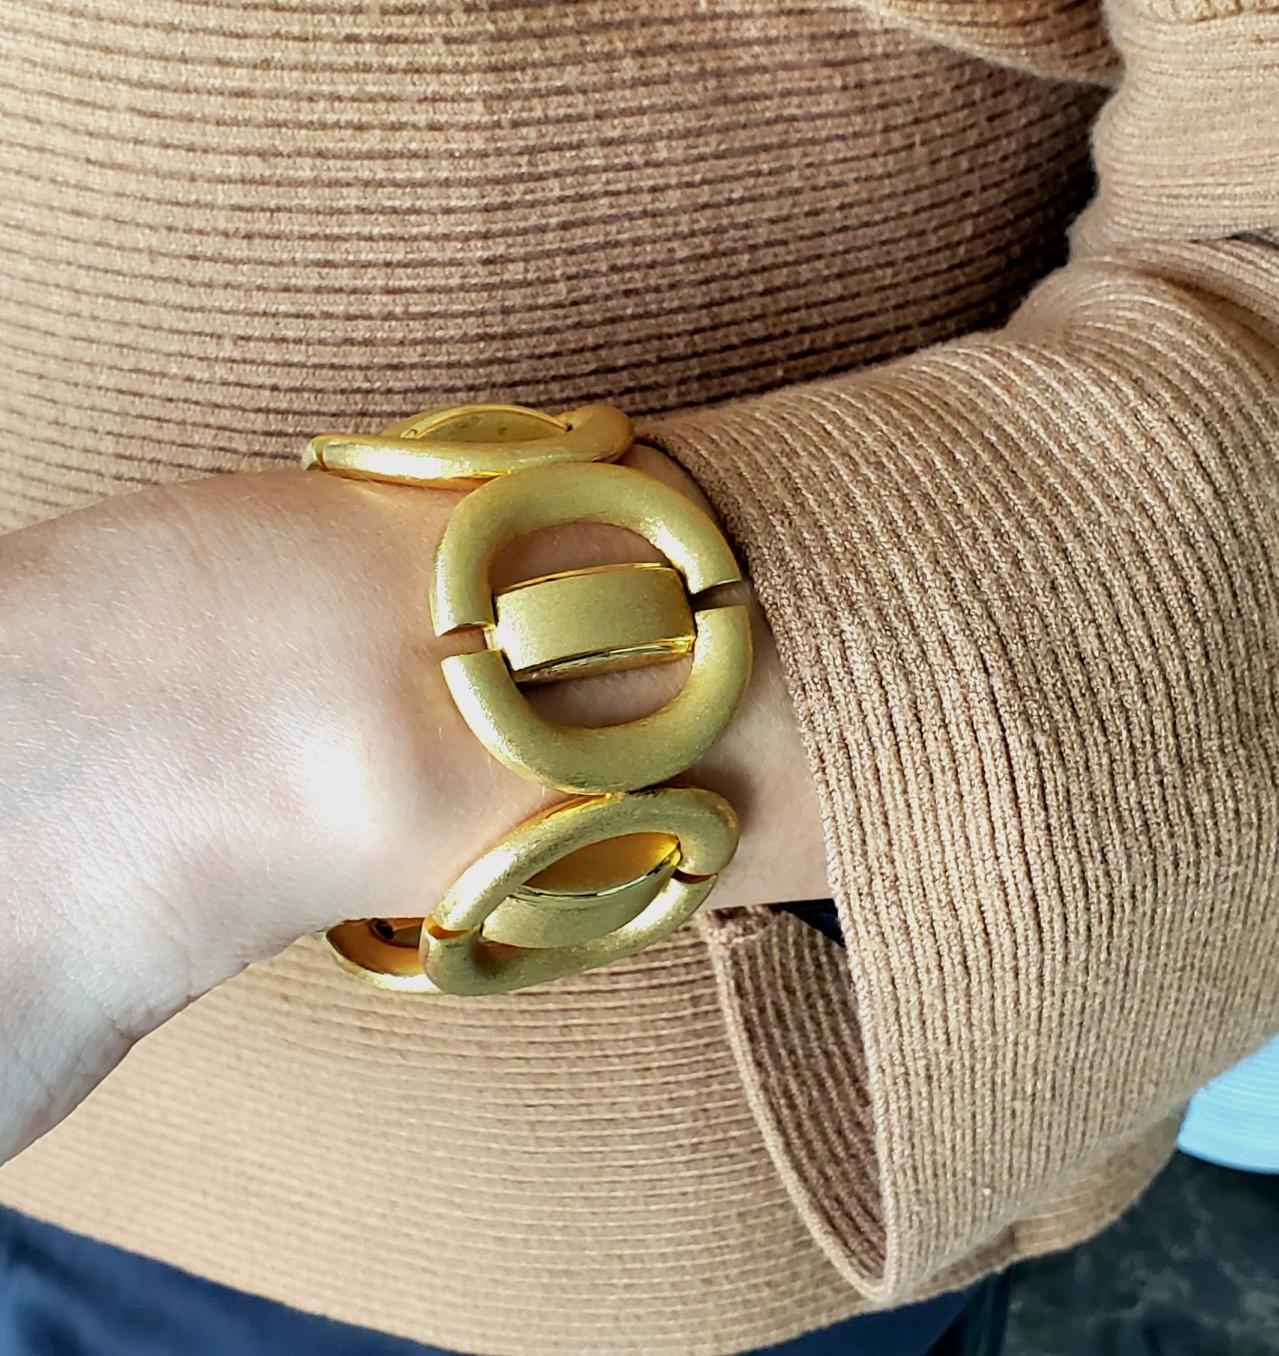 European modernist geometric bracelet.

An impressive geometric flexible bracelet created in Europe during the early modernism period, circa 1970. This bold and sleek piece has been crafted in solid yellow gold of 18 karats with the entire surfaces